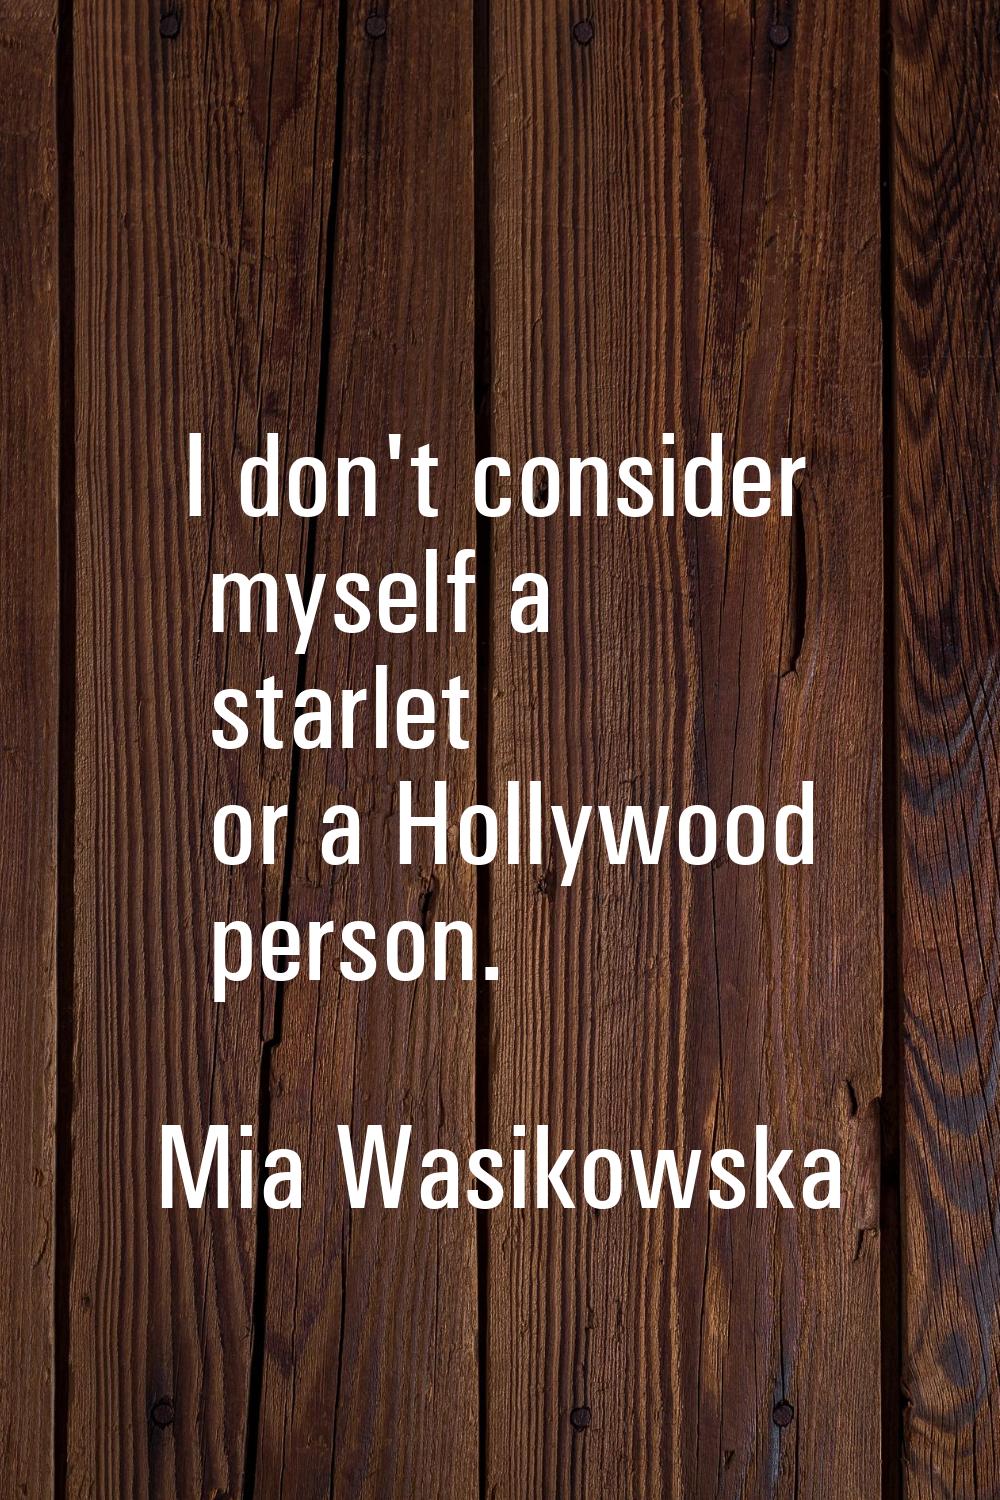 I don't consider myself a starlet or a Hollywood person.